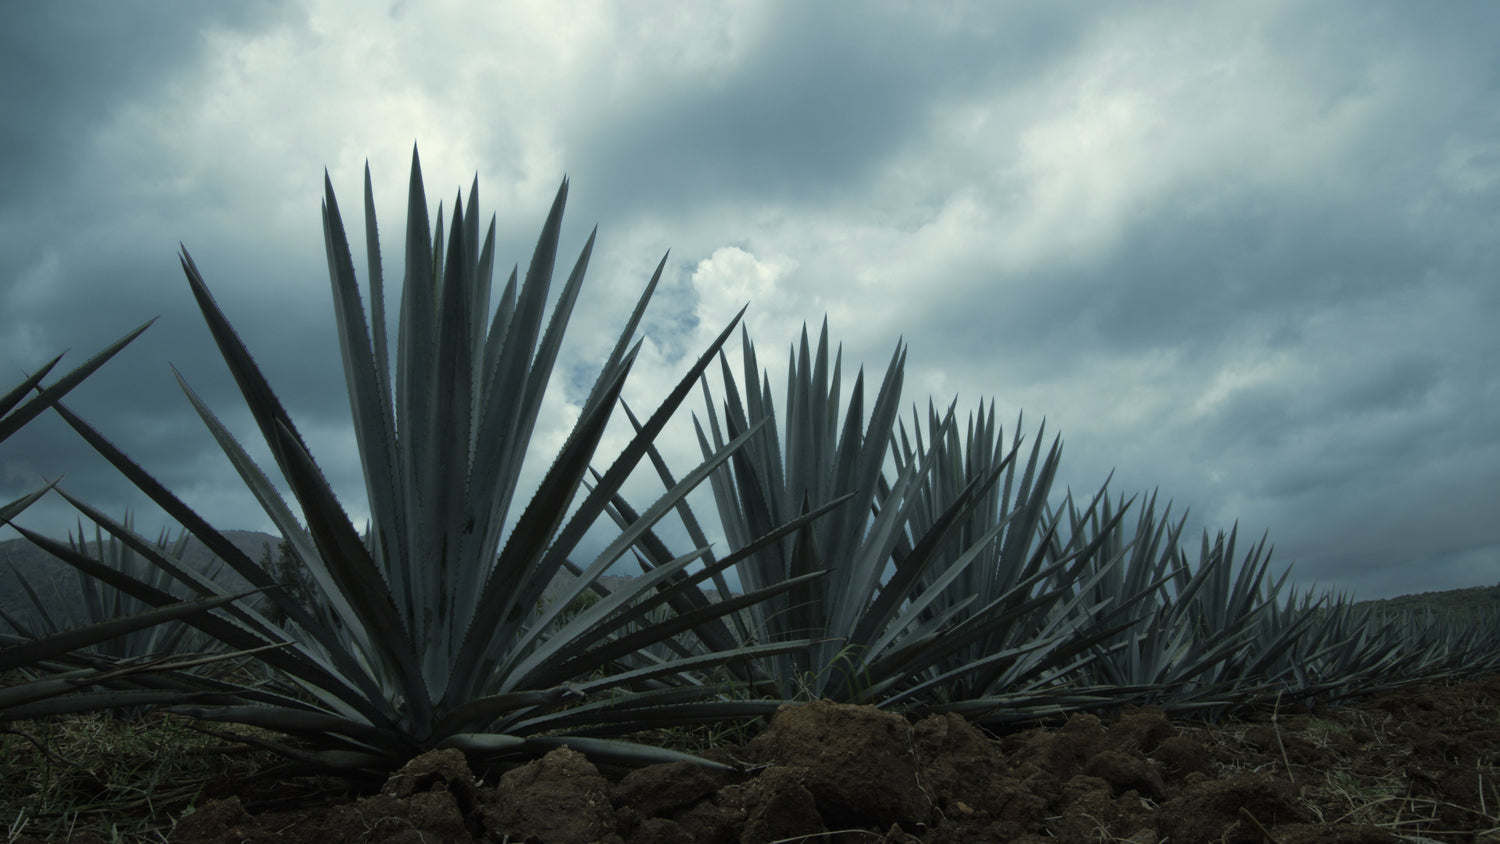 Tequila in the news